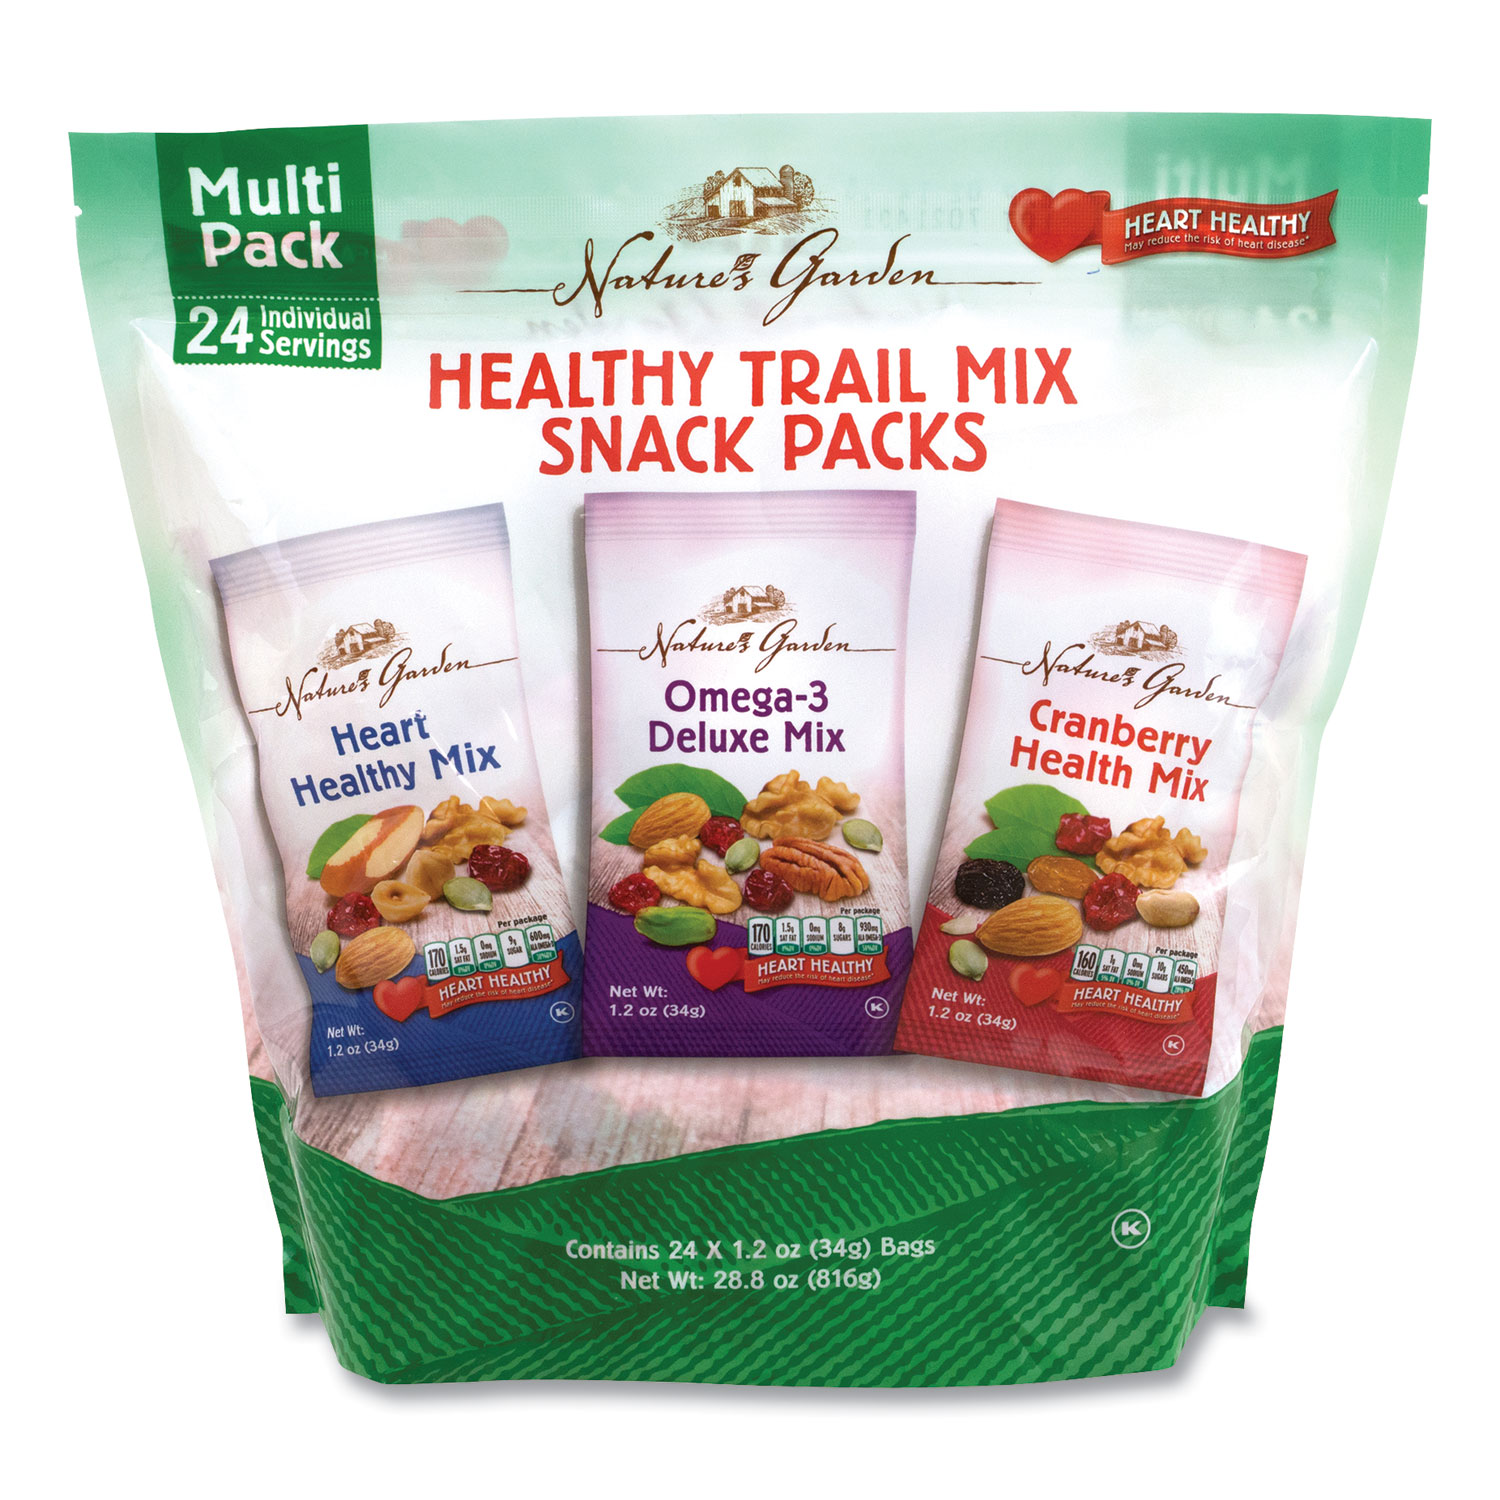 Natures Garden Healthy Trail Mix Snack Packs, 1.2 oz Pouch, 24 Pouches/Box, Free Delivery in 1-4 Business Days